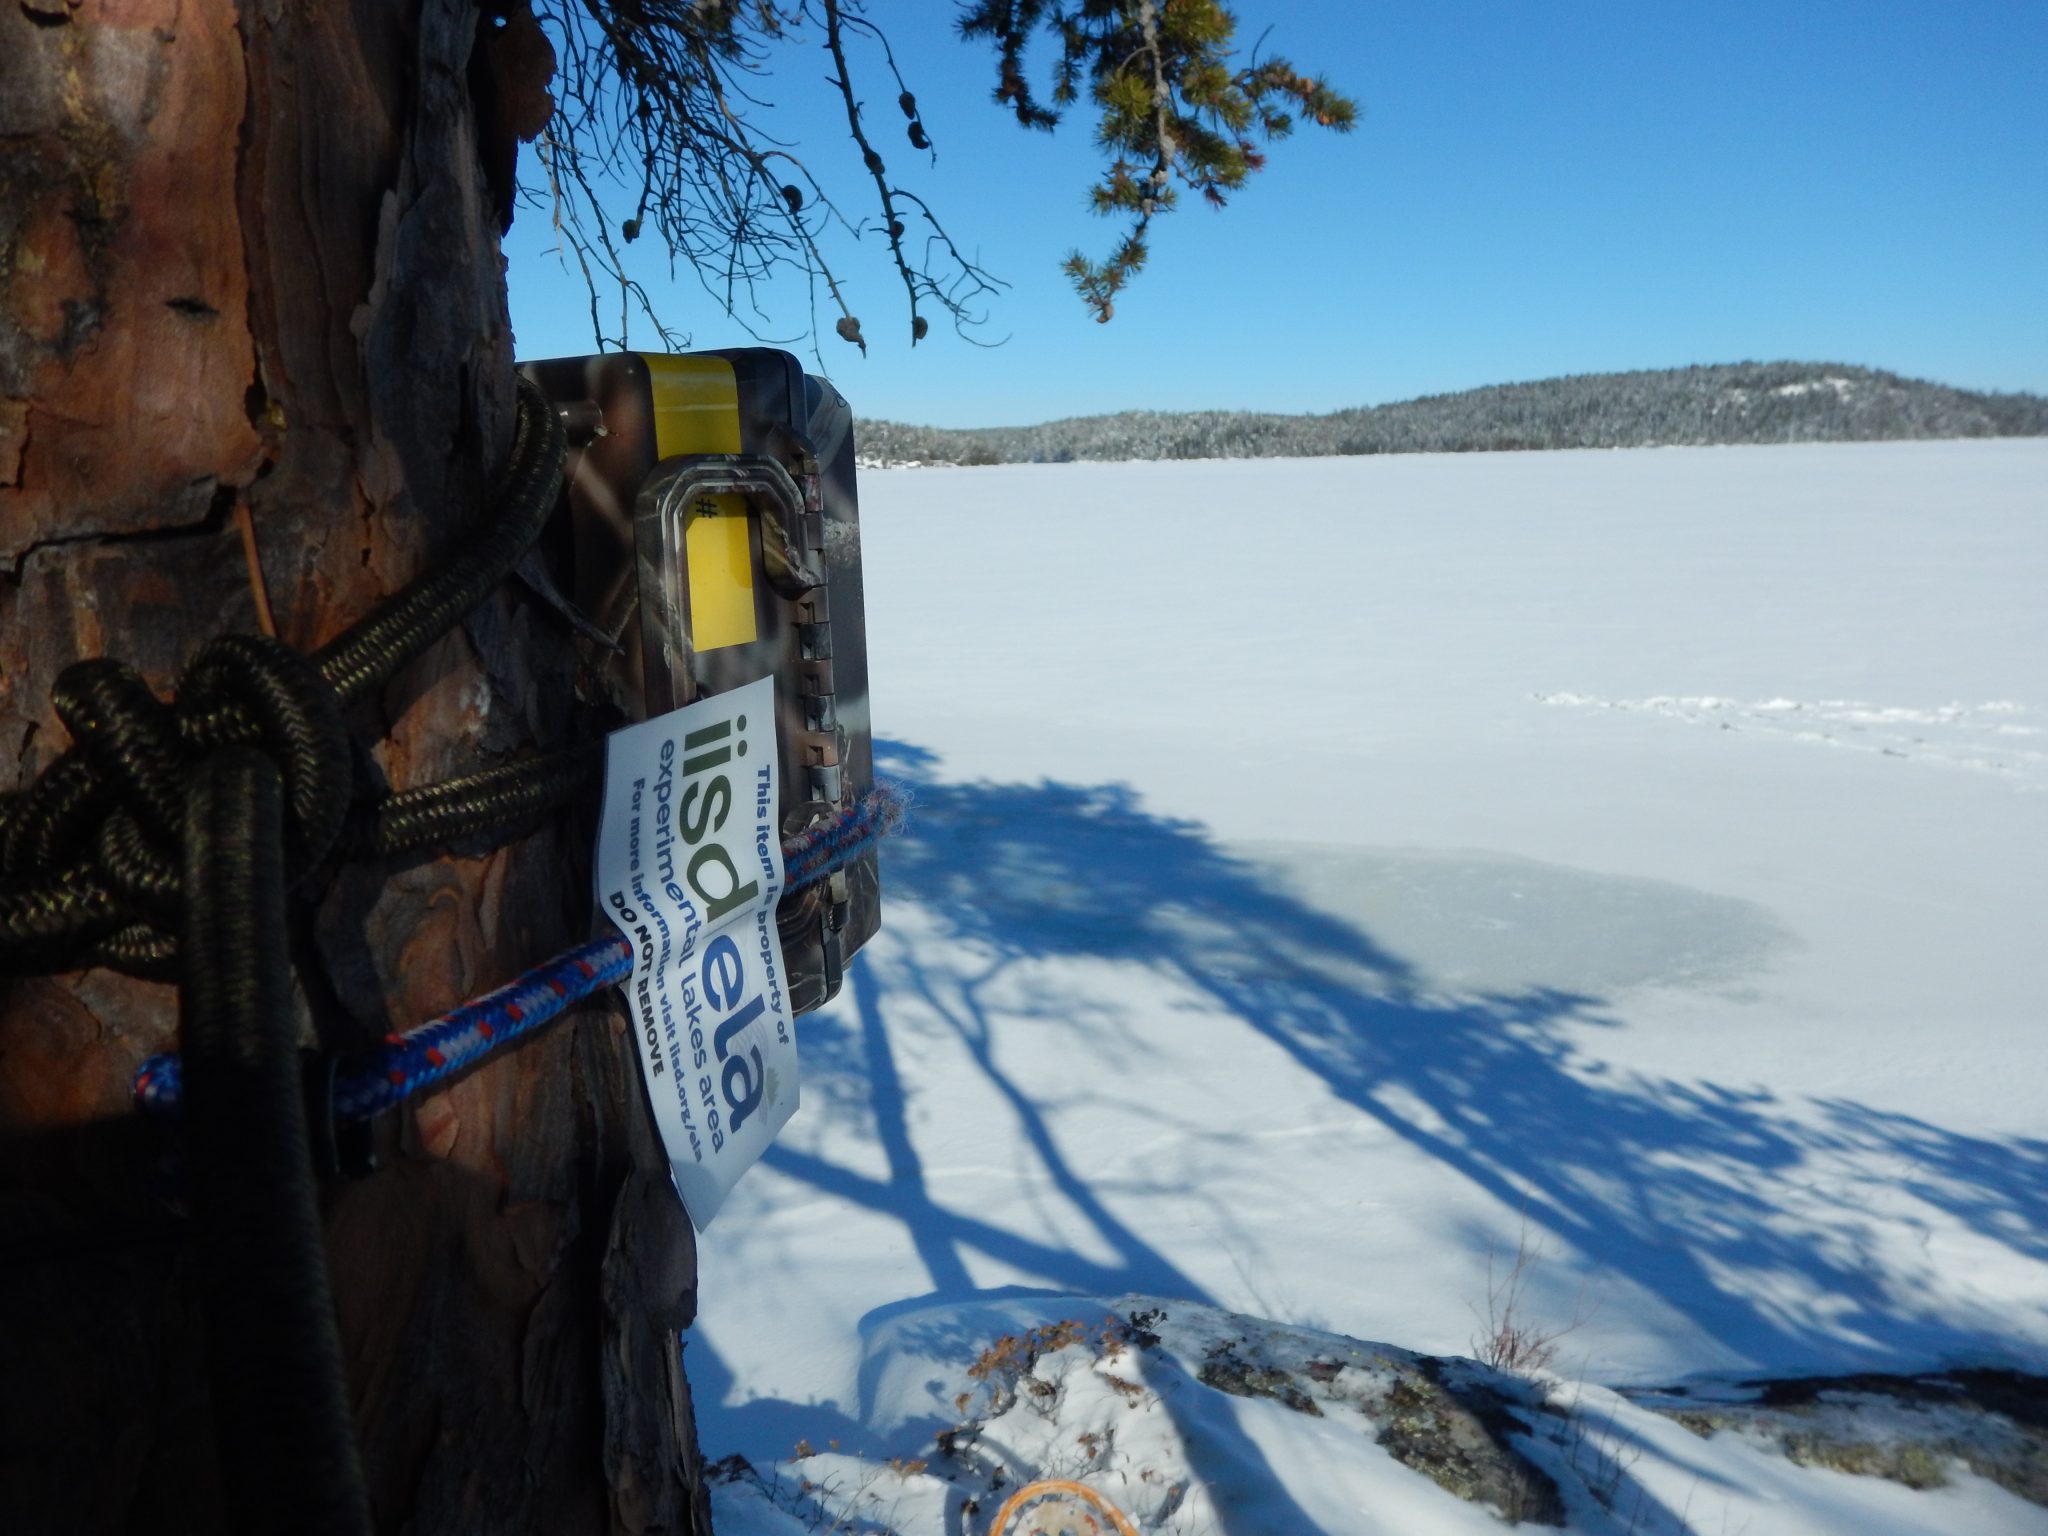 camera attached to a tree at IISD Experimental Lakes Area in Ontario